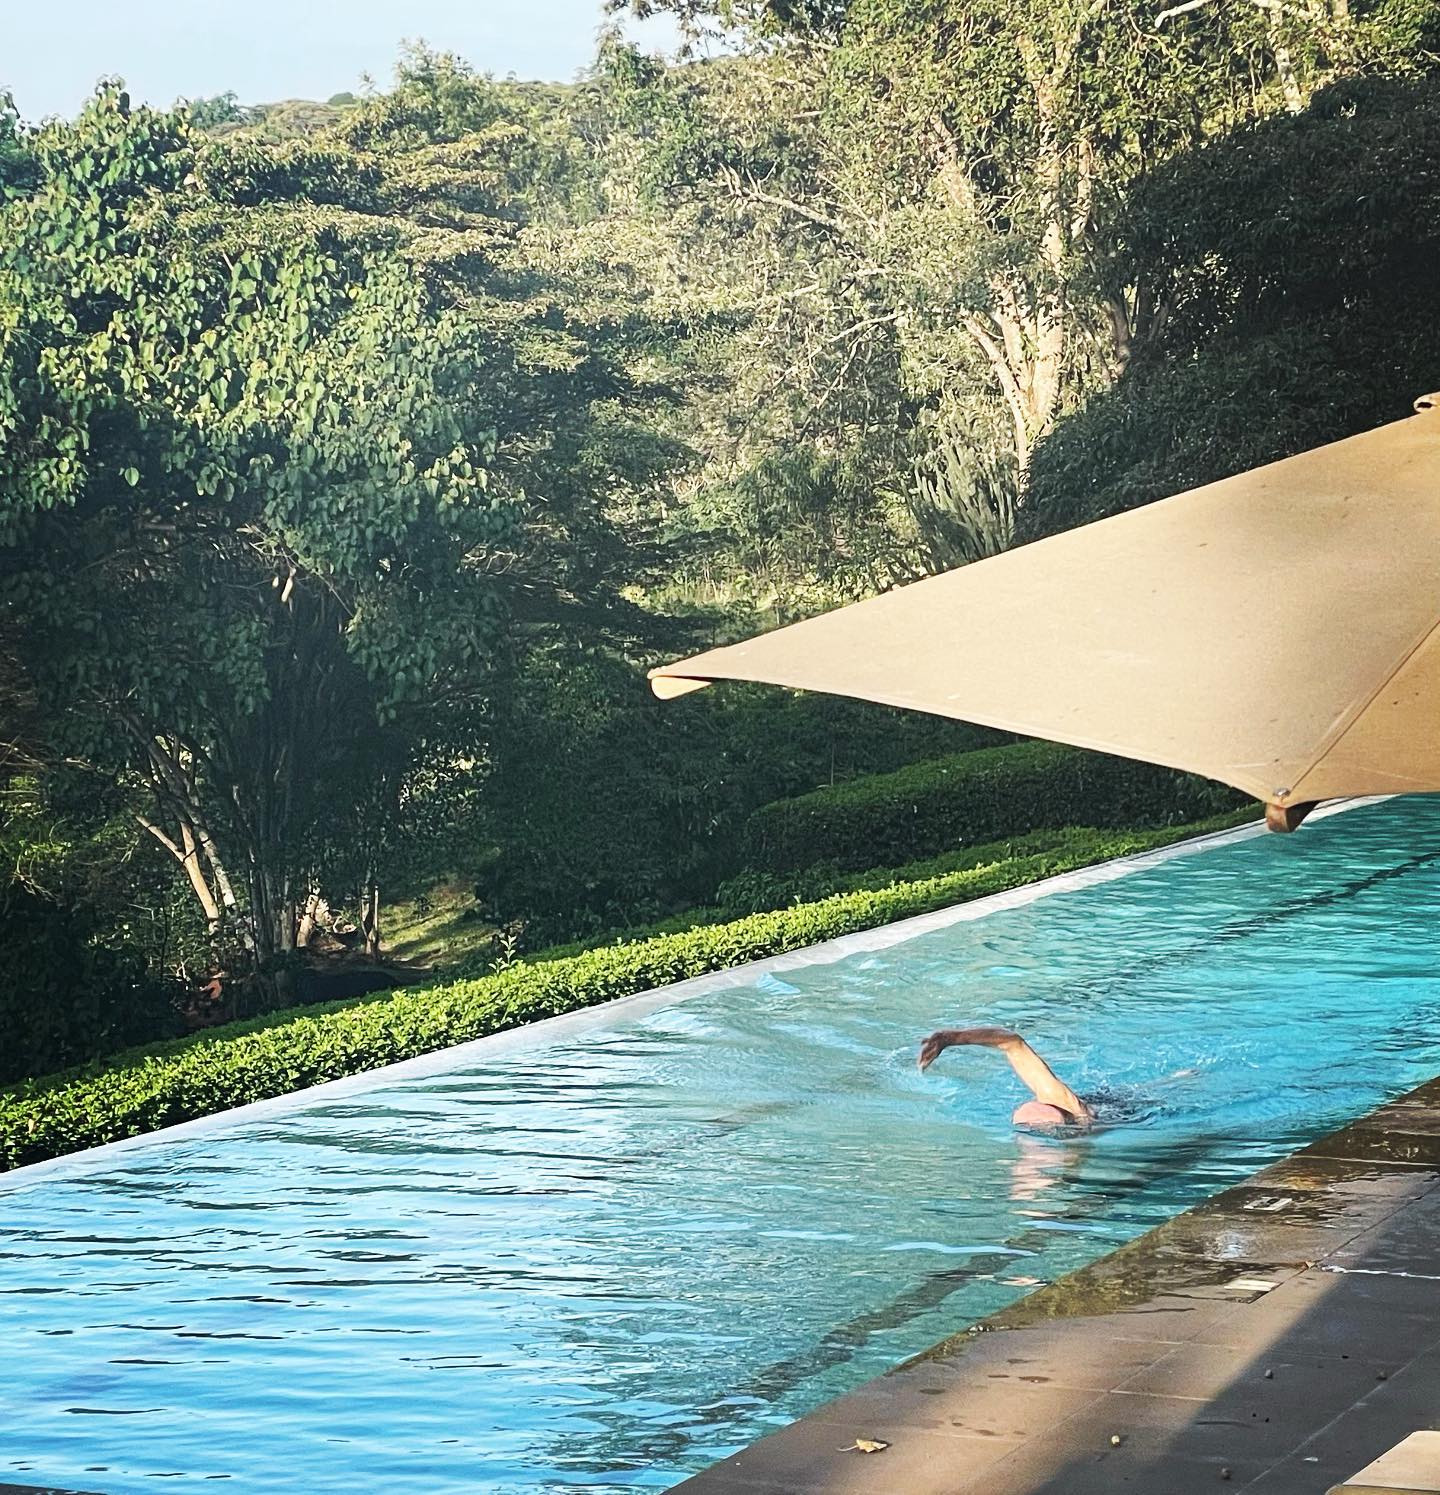 Diving in to Monday! One of our lovely guests kicking off his stay with laps in the 25metre pool whilst the coffee beans are being roasted and the bird chorus welcomes a new day and the start of a new week. #swim #swimming #laps #training #fitness #wellness #health #healthy #healthylifestyle #wellbeing #morning #routine #newday